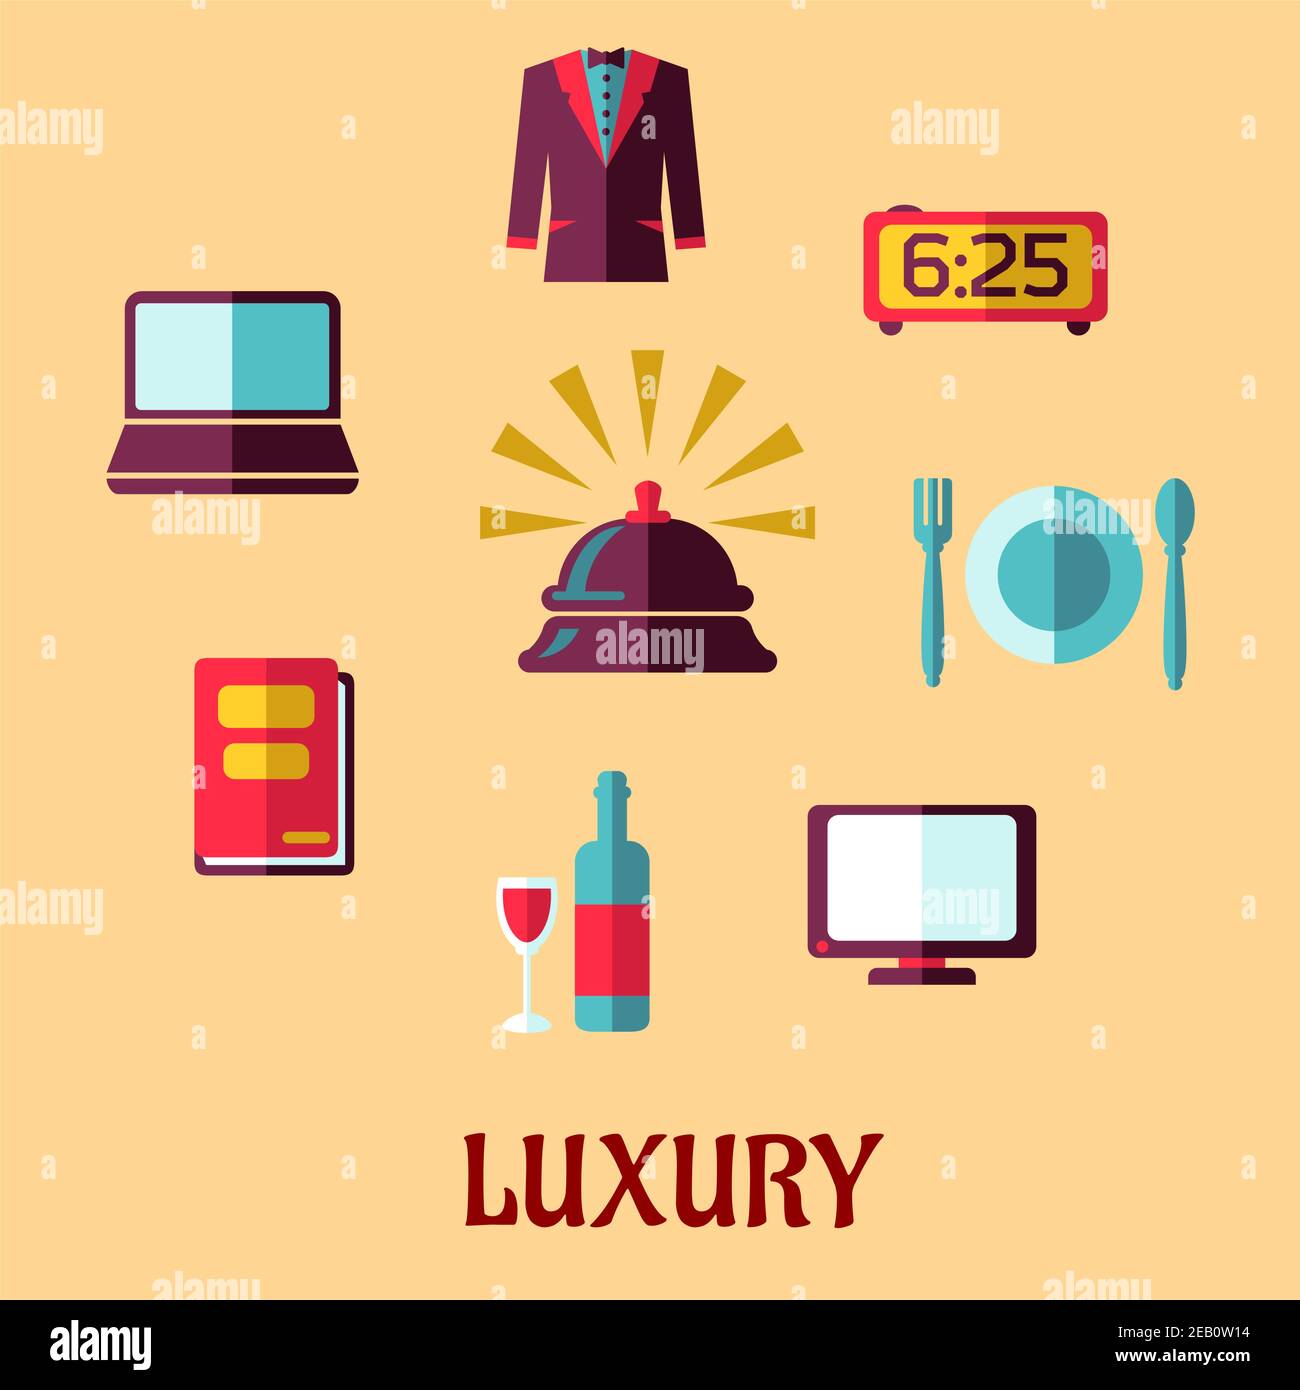 Flat concept for luxury five stars hotel with reception bell and high quality of room service icons isolated on beige background Stock Vector